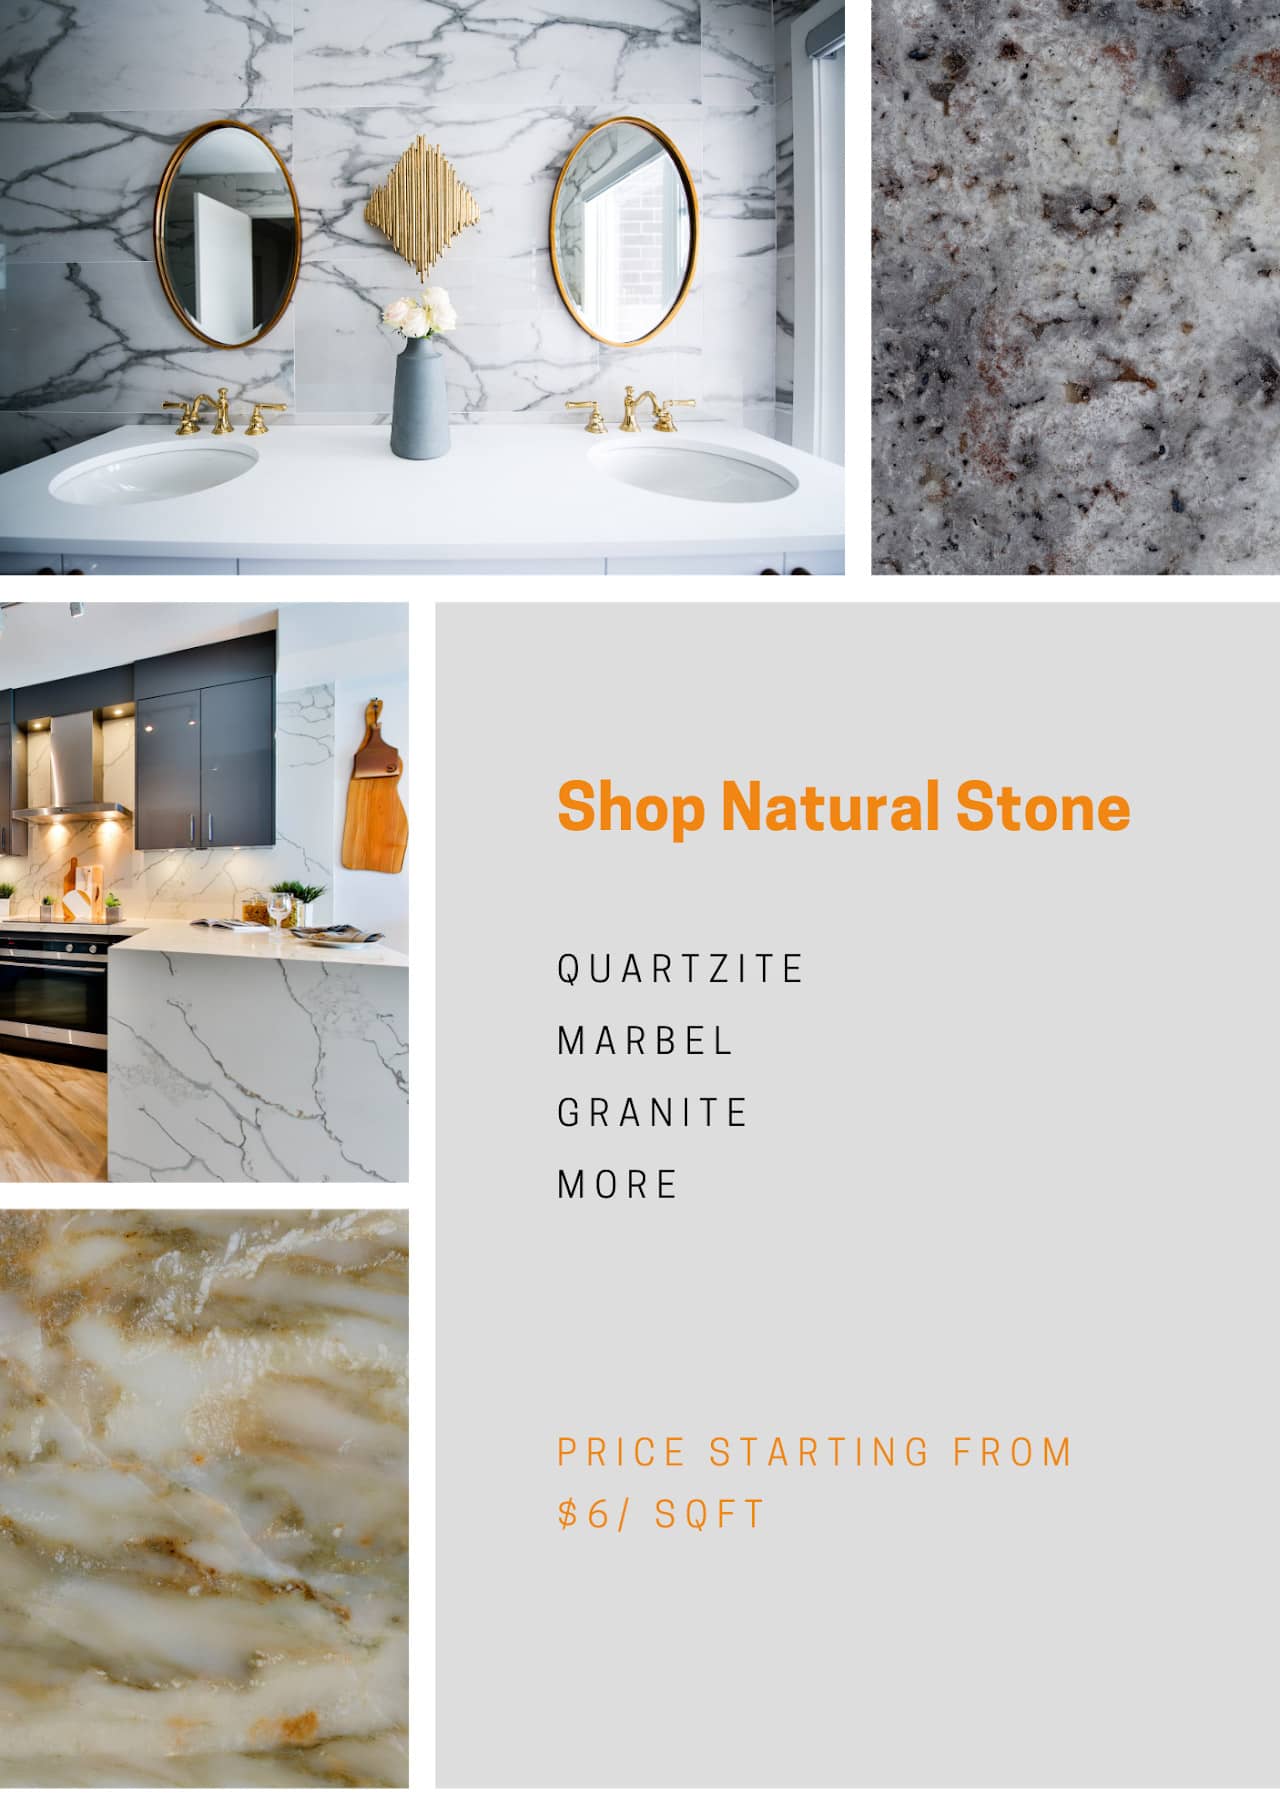 natural stones supplier in plano tx